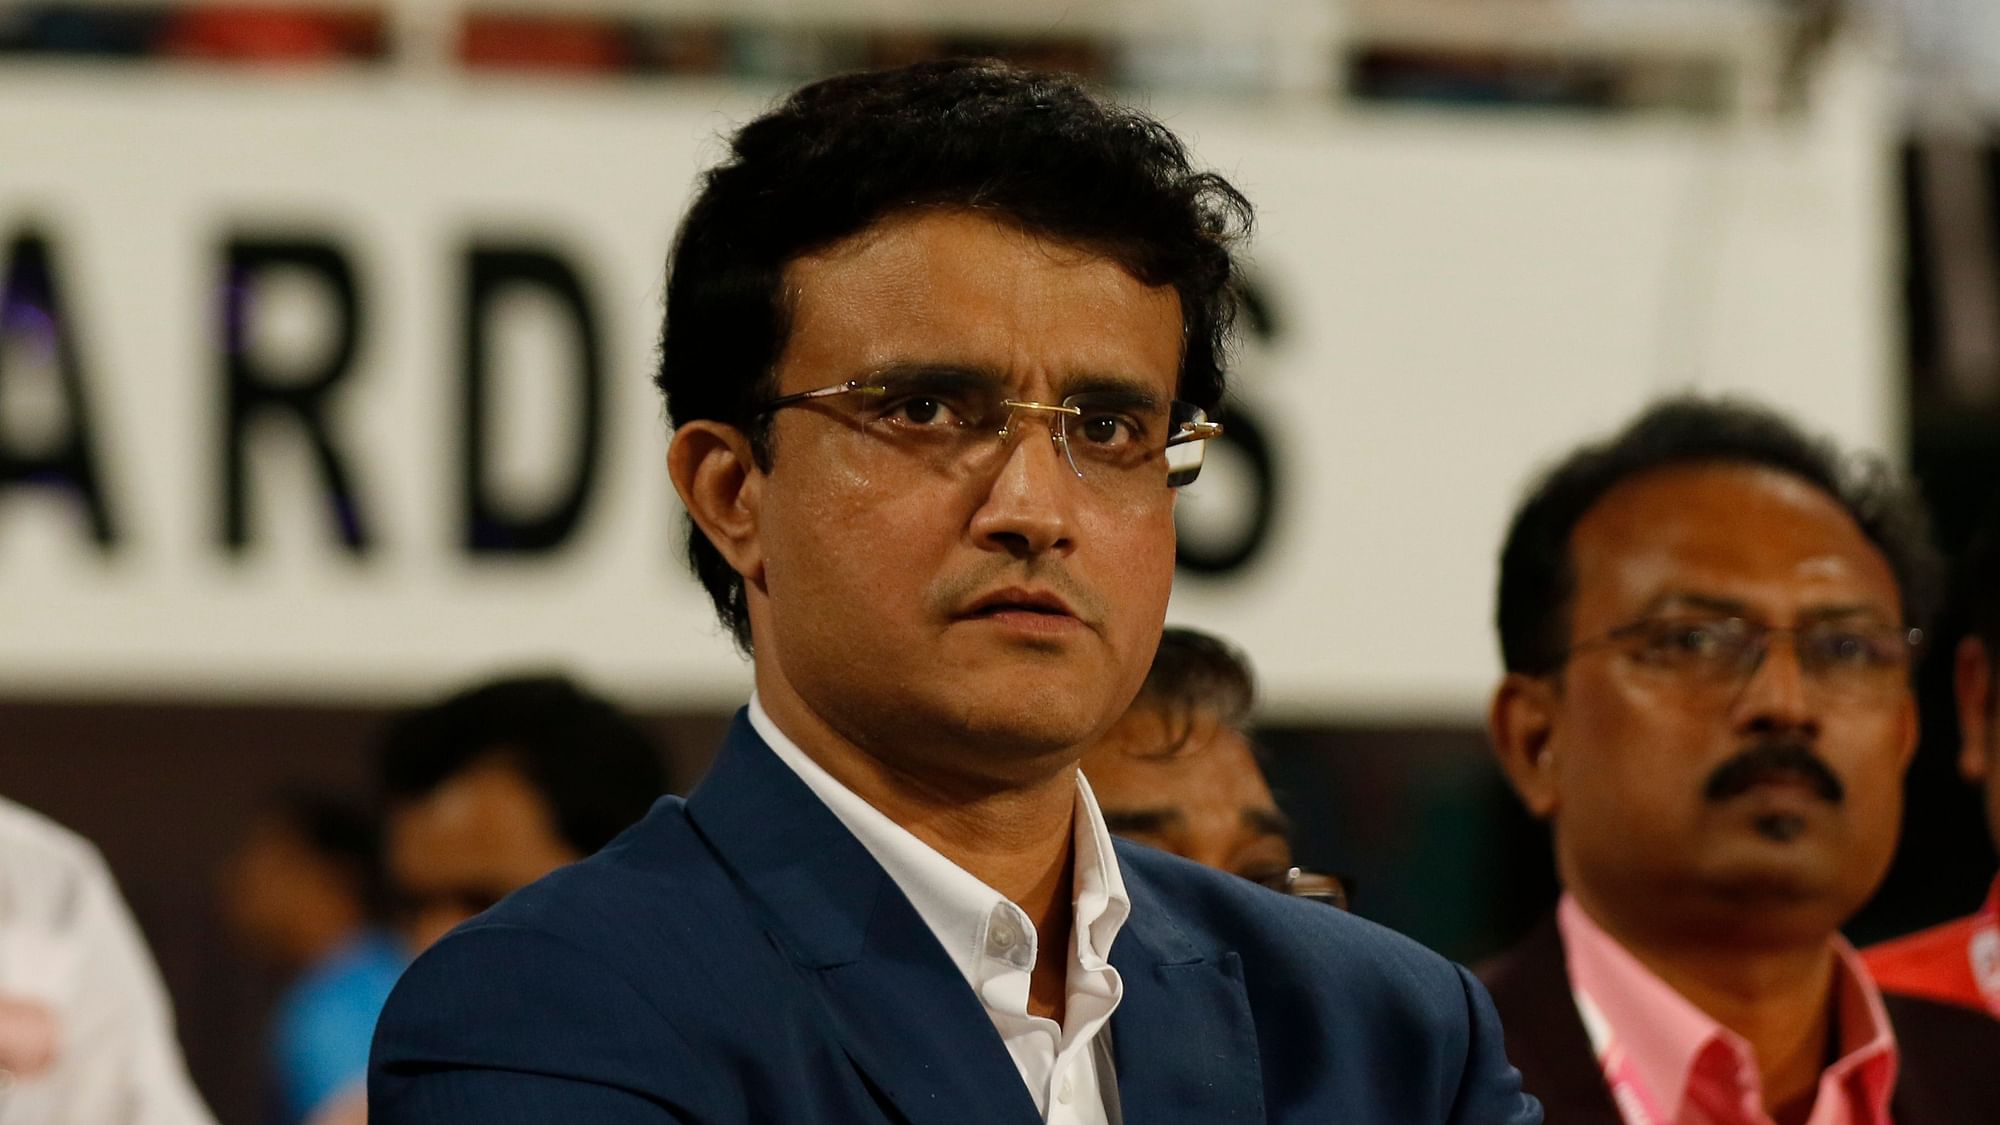 Sourav Ganguly led his first Annual General Meeting as BCCI President in Mumbai on Sunday.